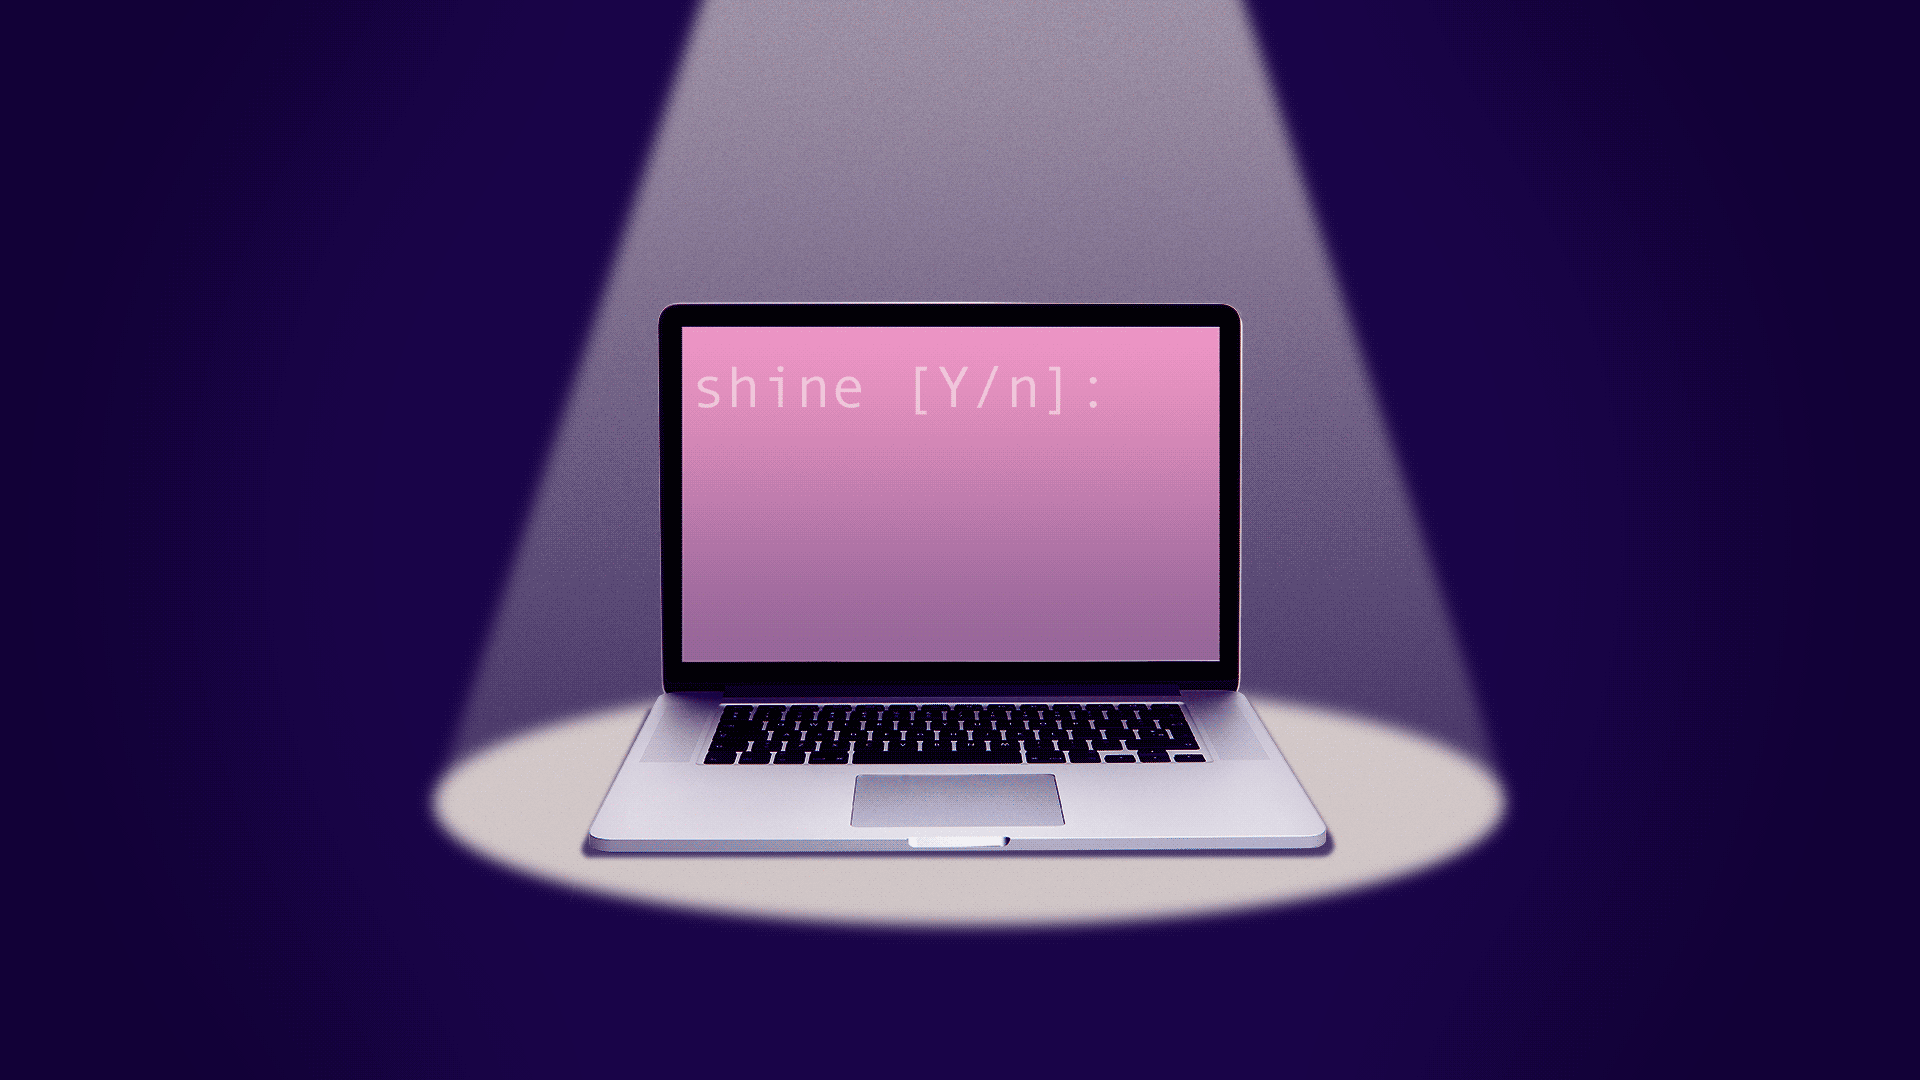  Animated Gif of a computer in a spotlight running a terminal-like program that reads: Shine, yes, no